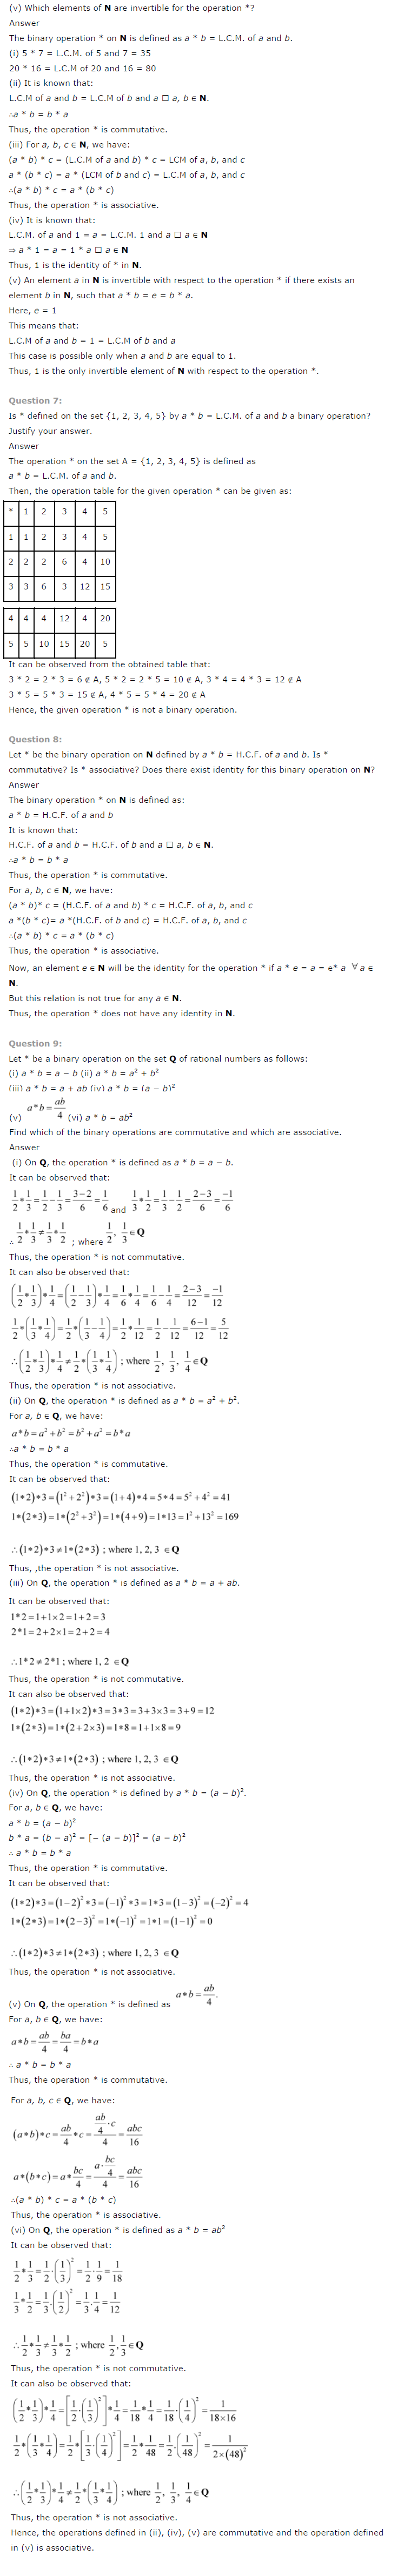 NCERT Solutions For Class 12 Maths Chapter 1 Relations and Functions-9